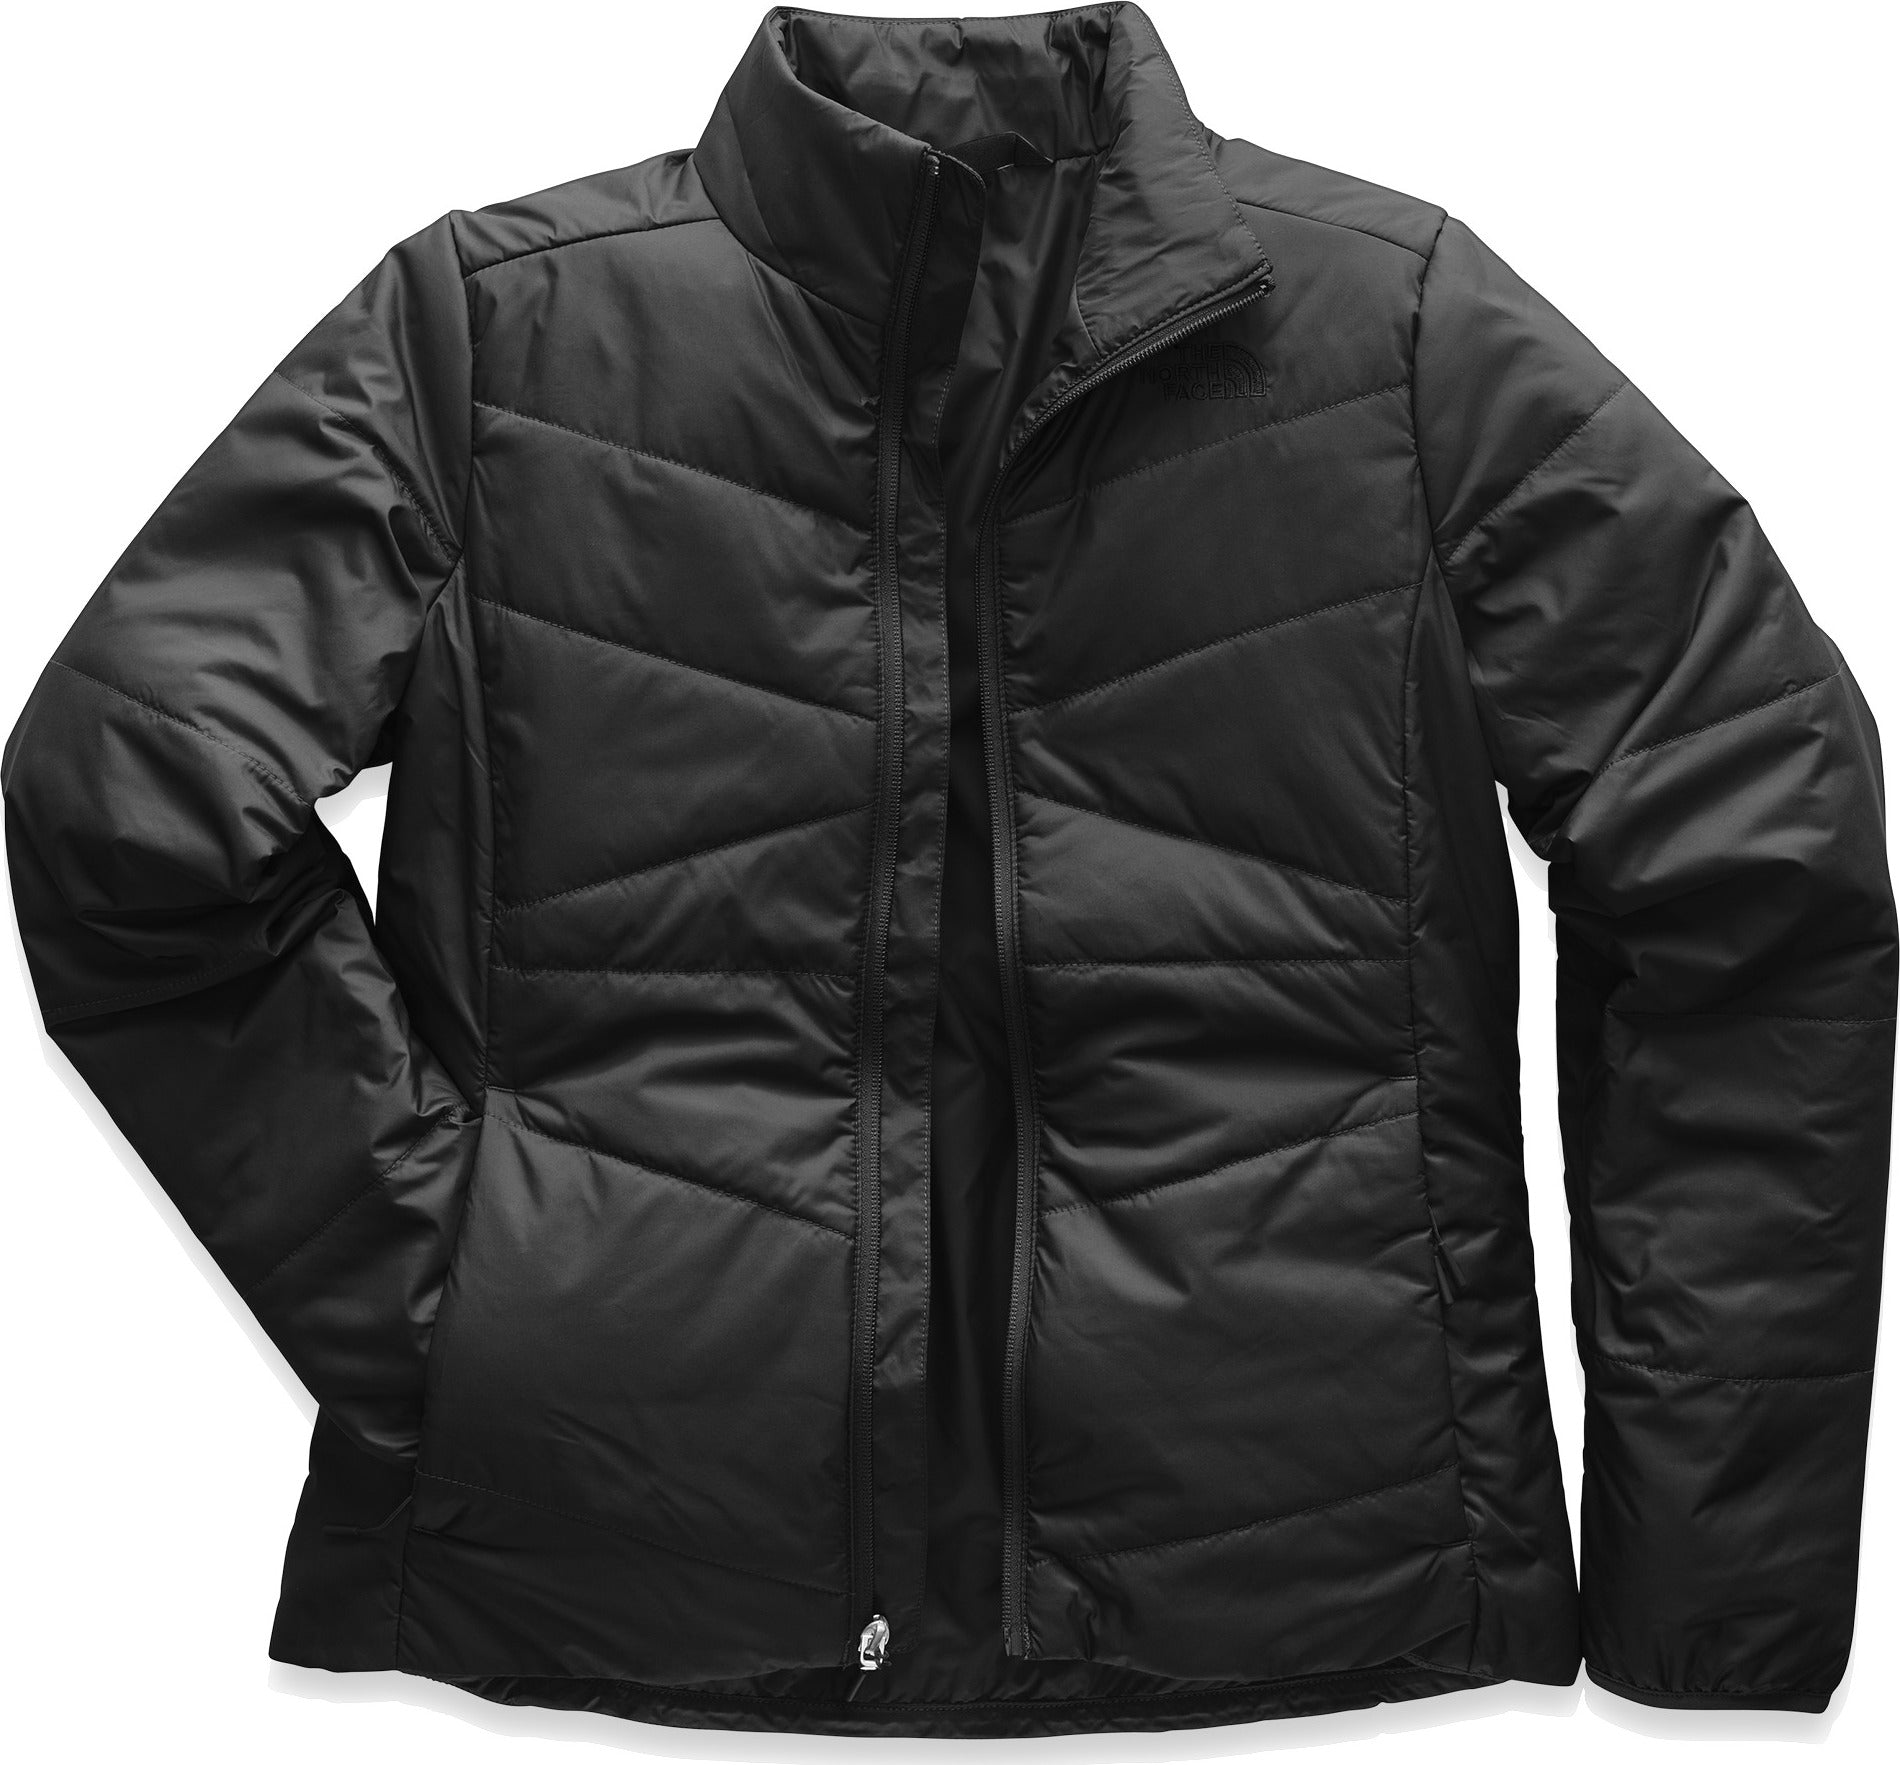 The North Face Bombay Jacket - Women's | The Last Hunt